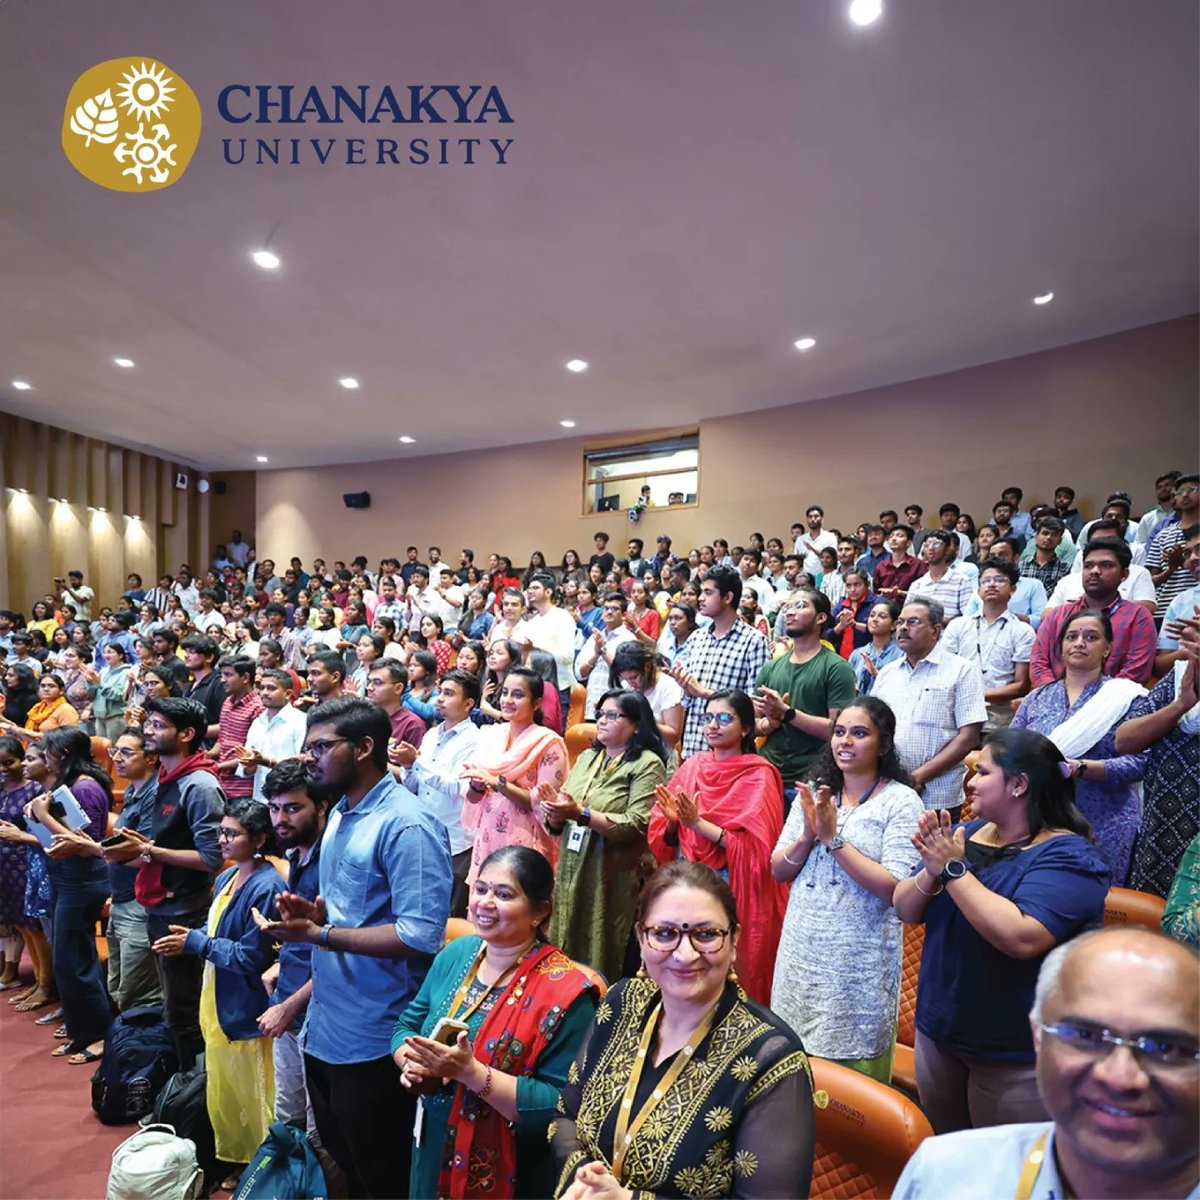 Proud moments at Chanakya University! Feb '24 saw our International Advisory Committee and Board of Governors gather to celebrate milestones. Here's to excellence and innovation! #ChanakyaU #Milestones #GlobalCampus